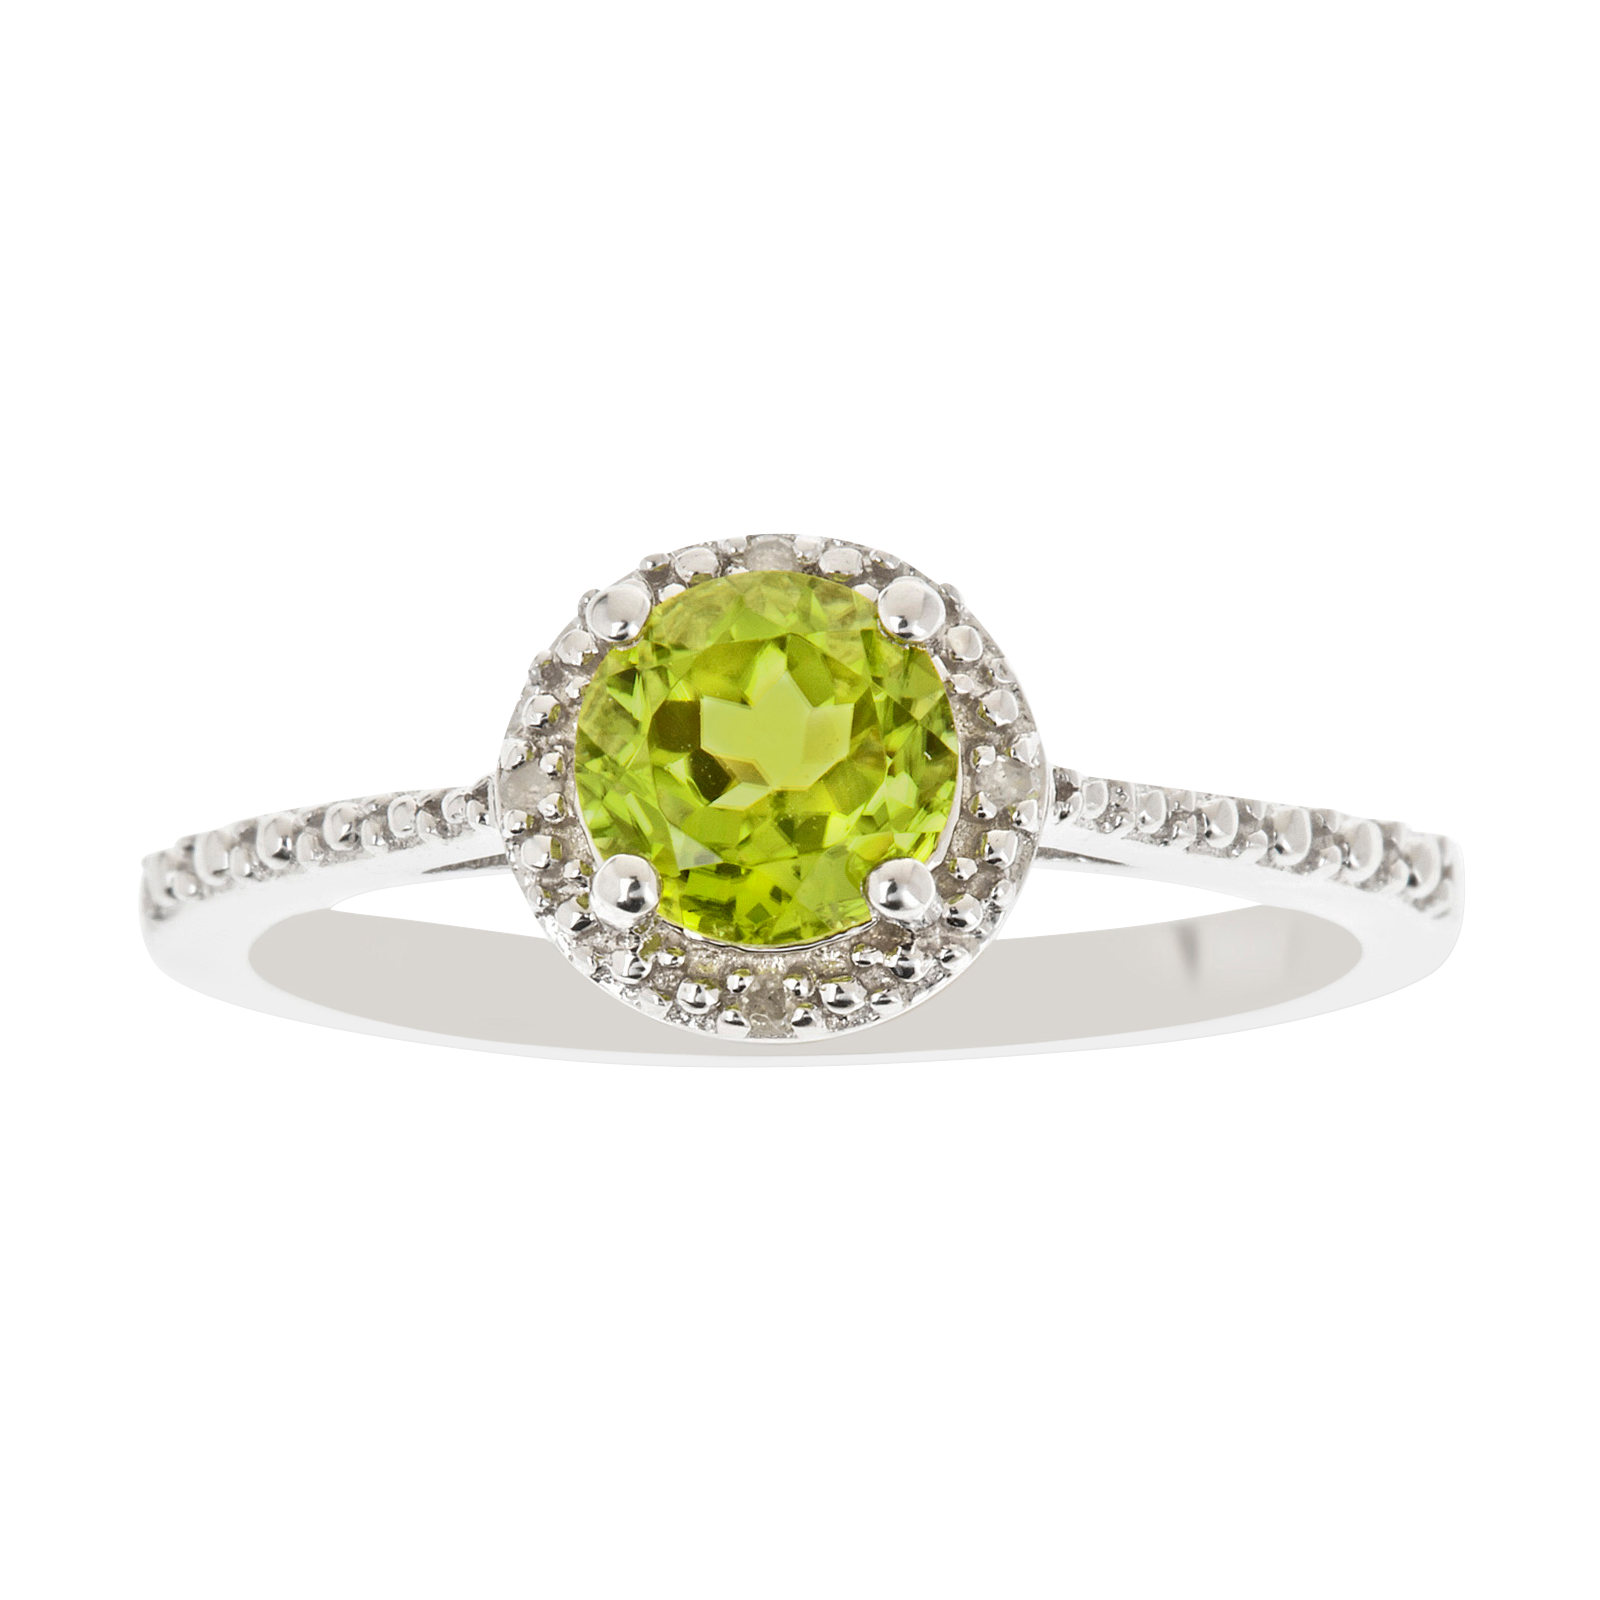 Ladies Sterling Silver Peridot and Diamond Accent Ring